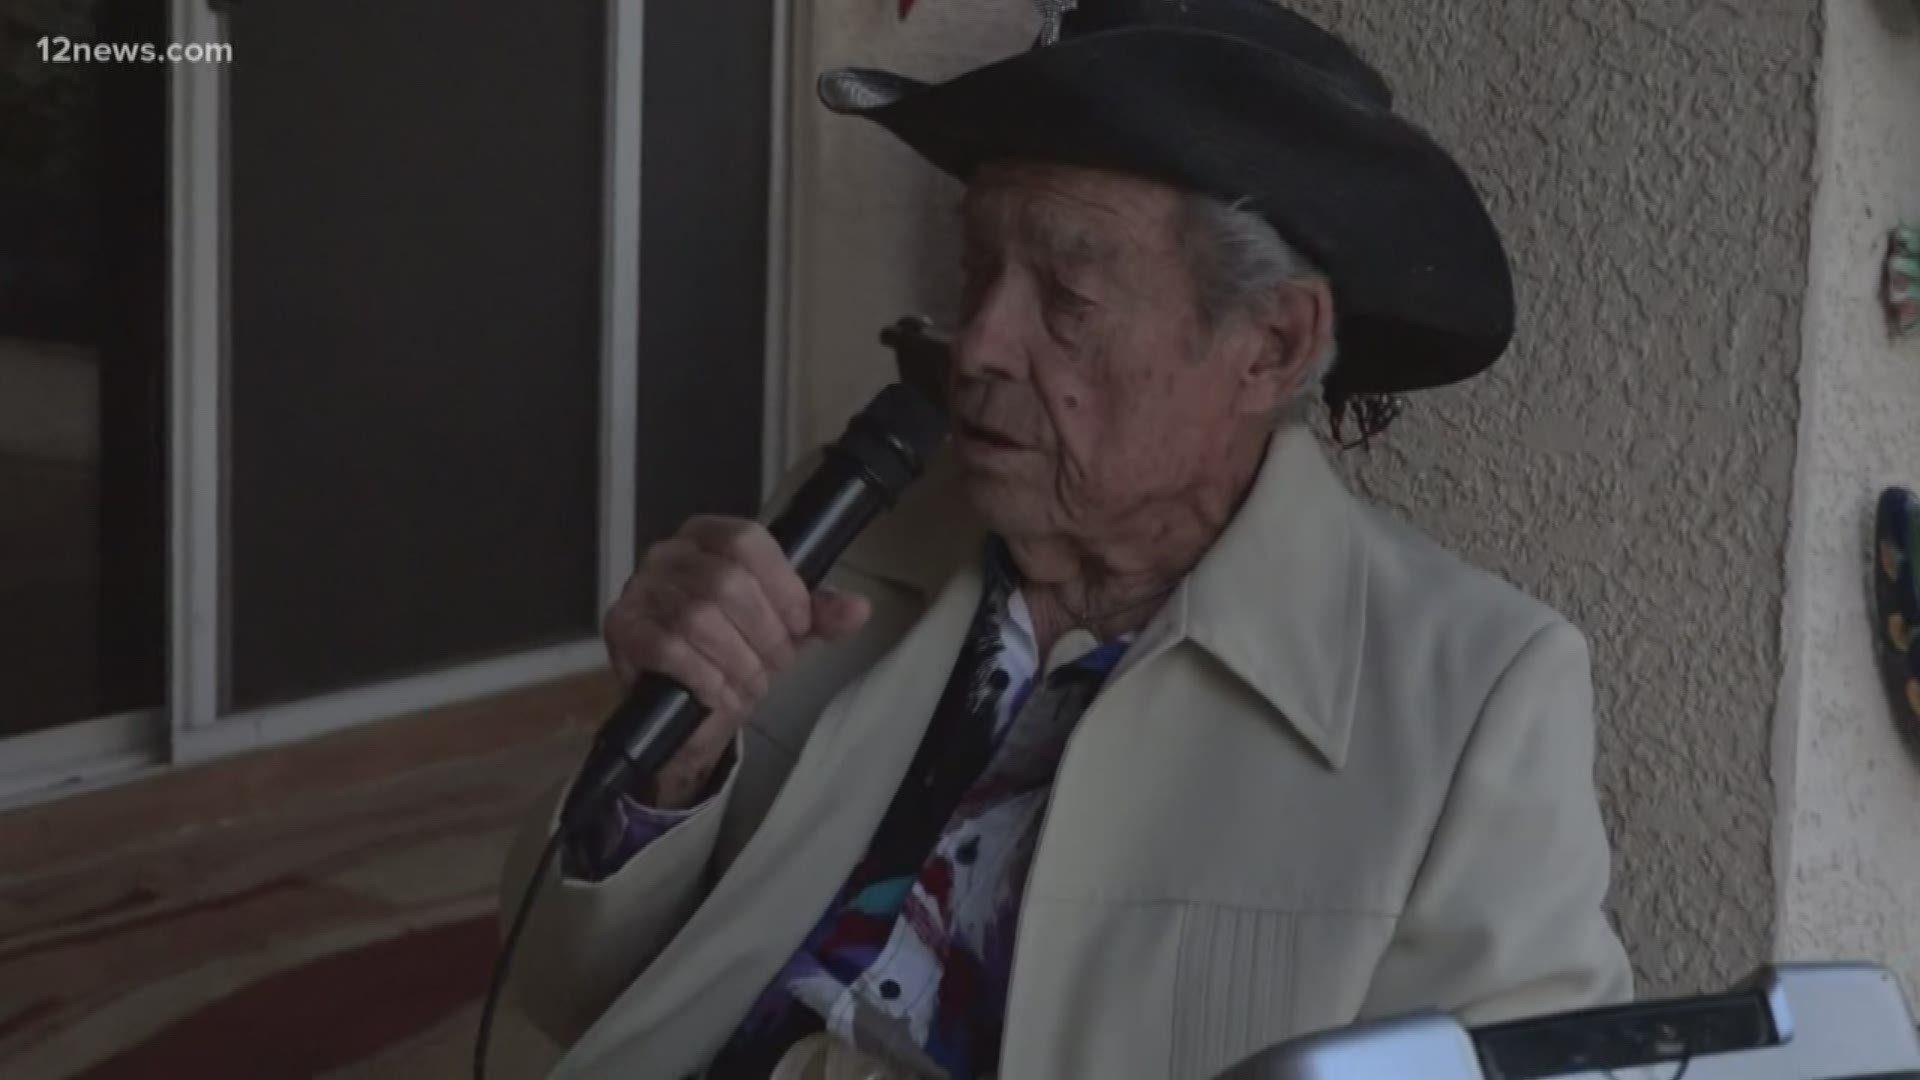 A World War II veteran has made it his mission to make people smile. Frank Hobbs, 94, is singing to entertain passersby.